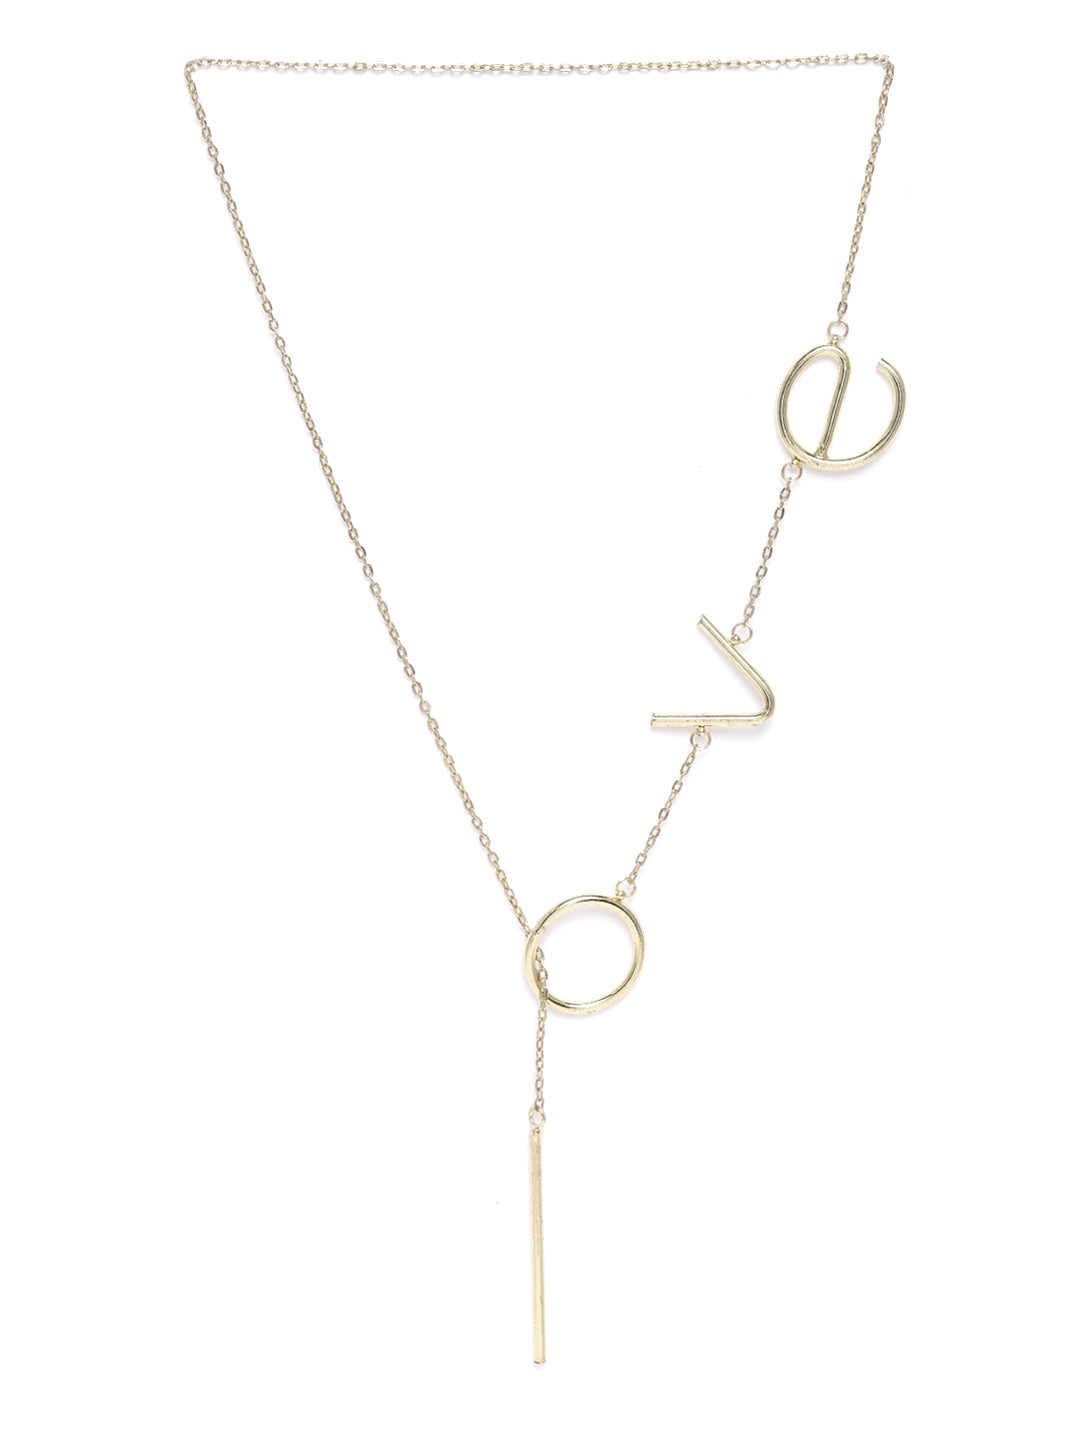 Blueberry gold plated love lariat chain necklace